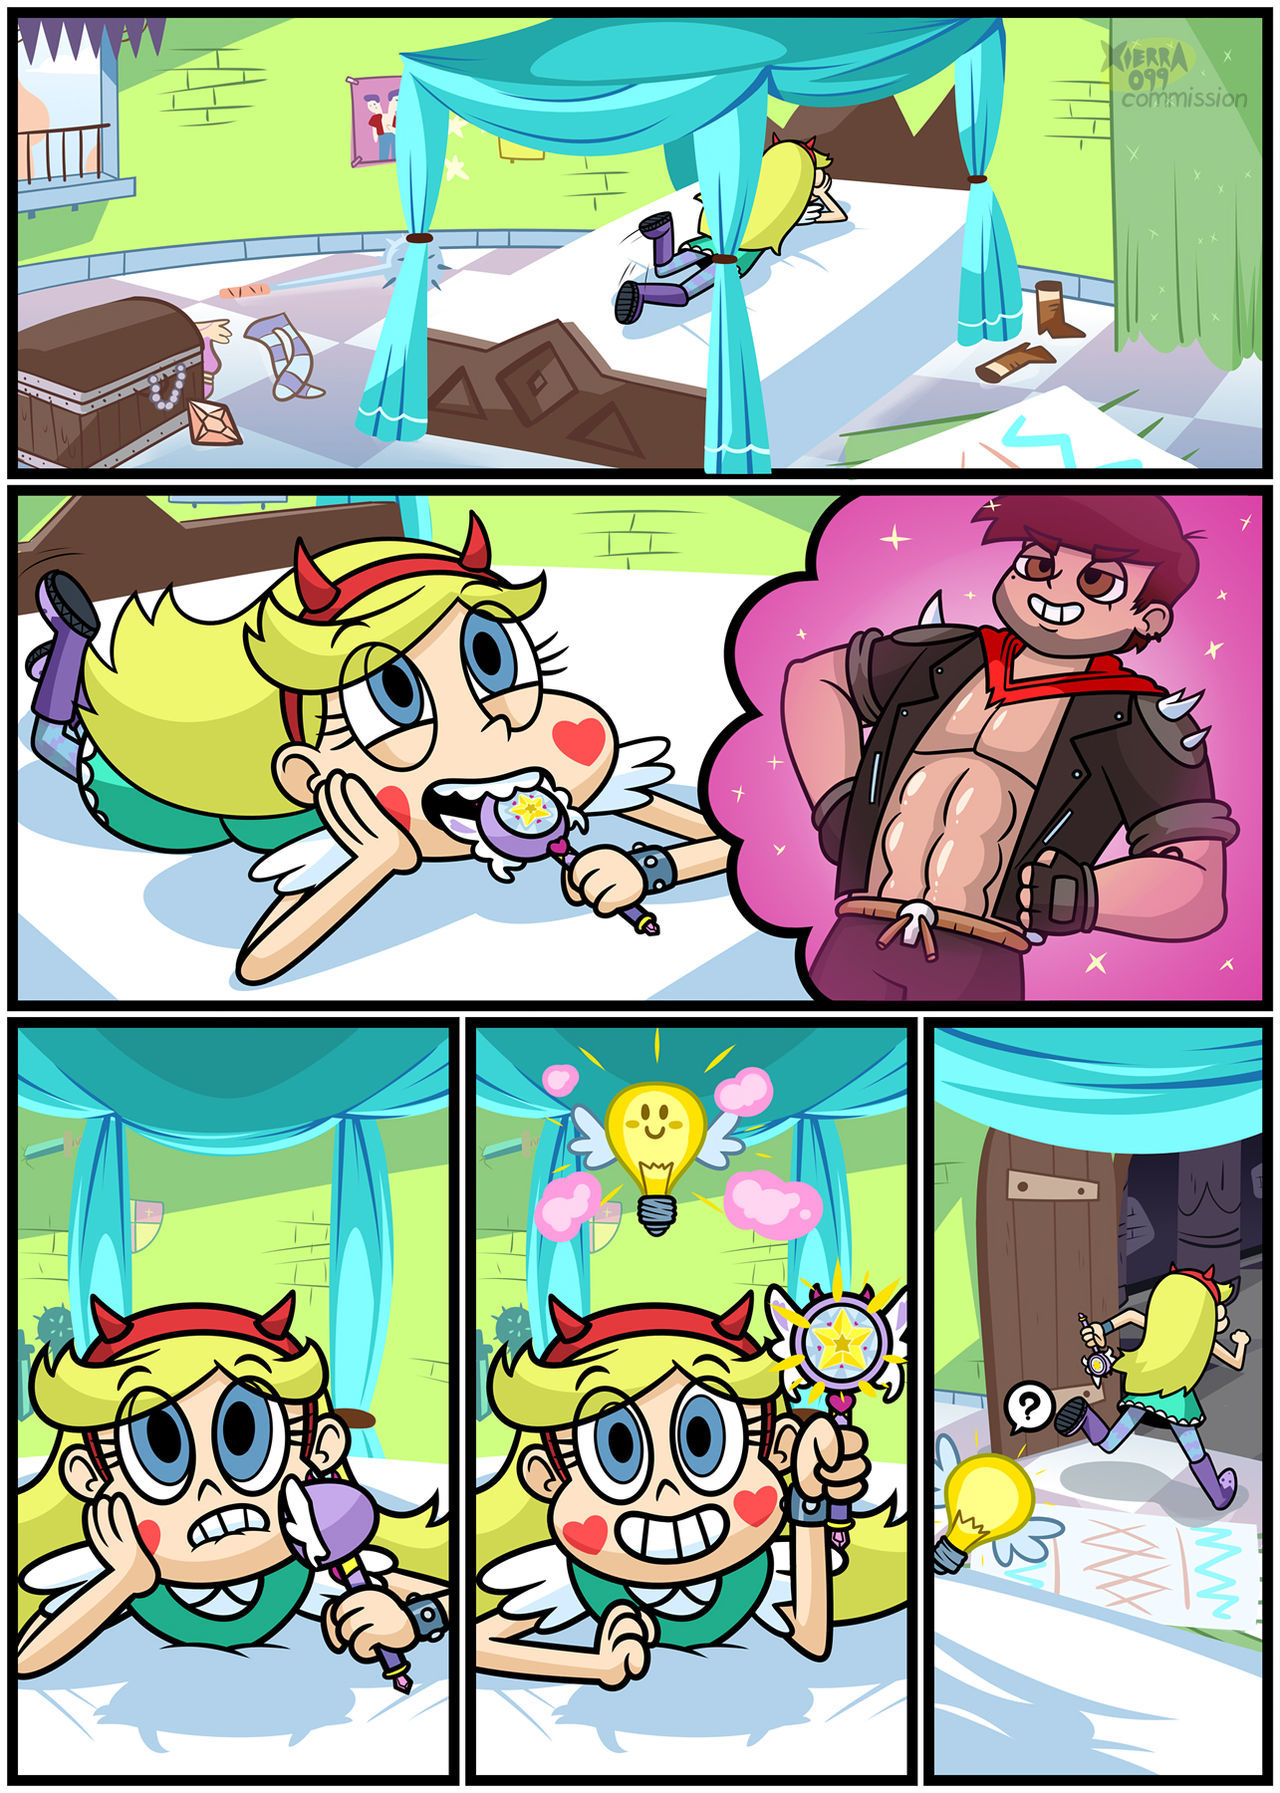 Future With Benefits (Star Vs the Forces of Evil) by Xierra099 page 2